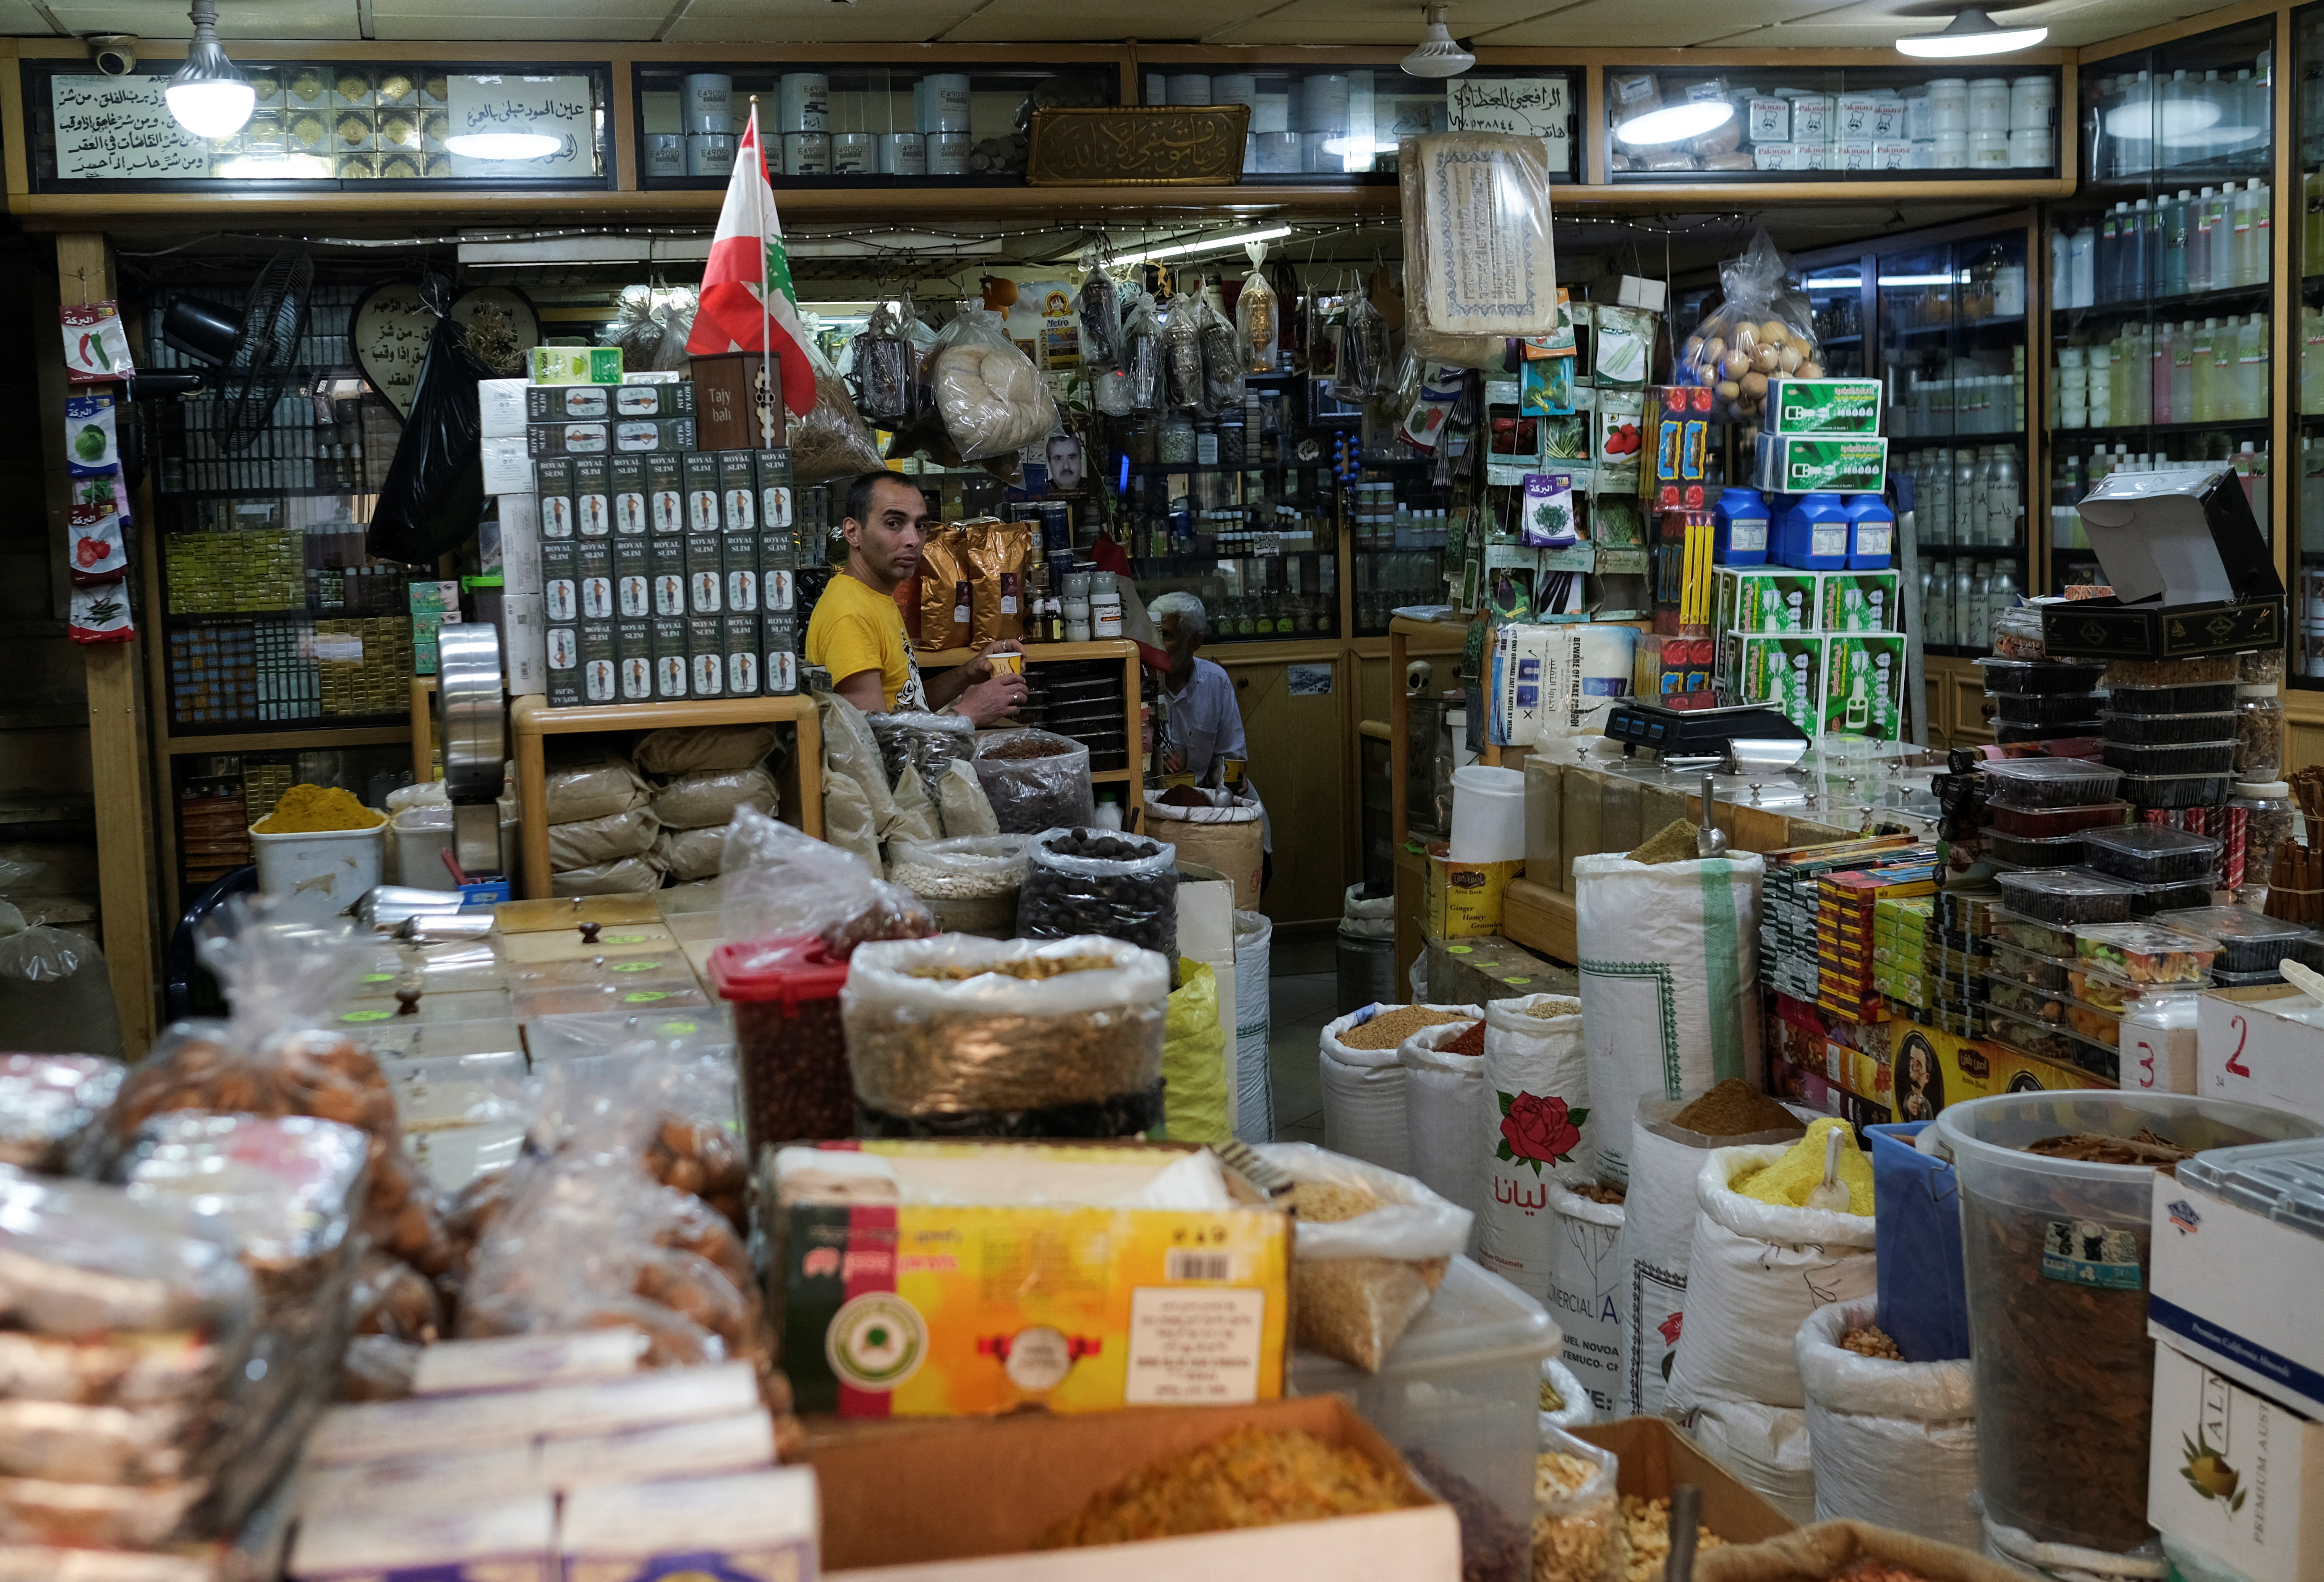 Goods are displayed for sale inside the shop of Omar al-Rafie in Tripoli